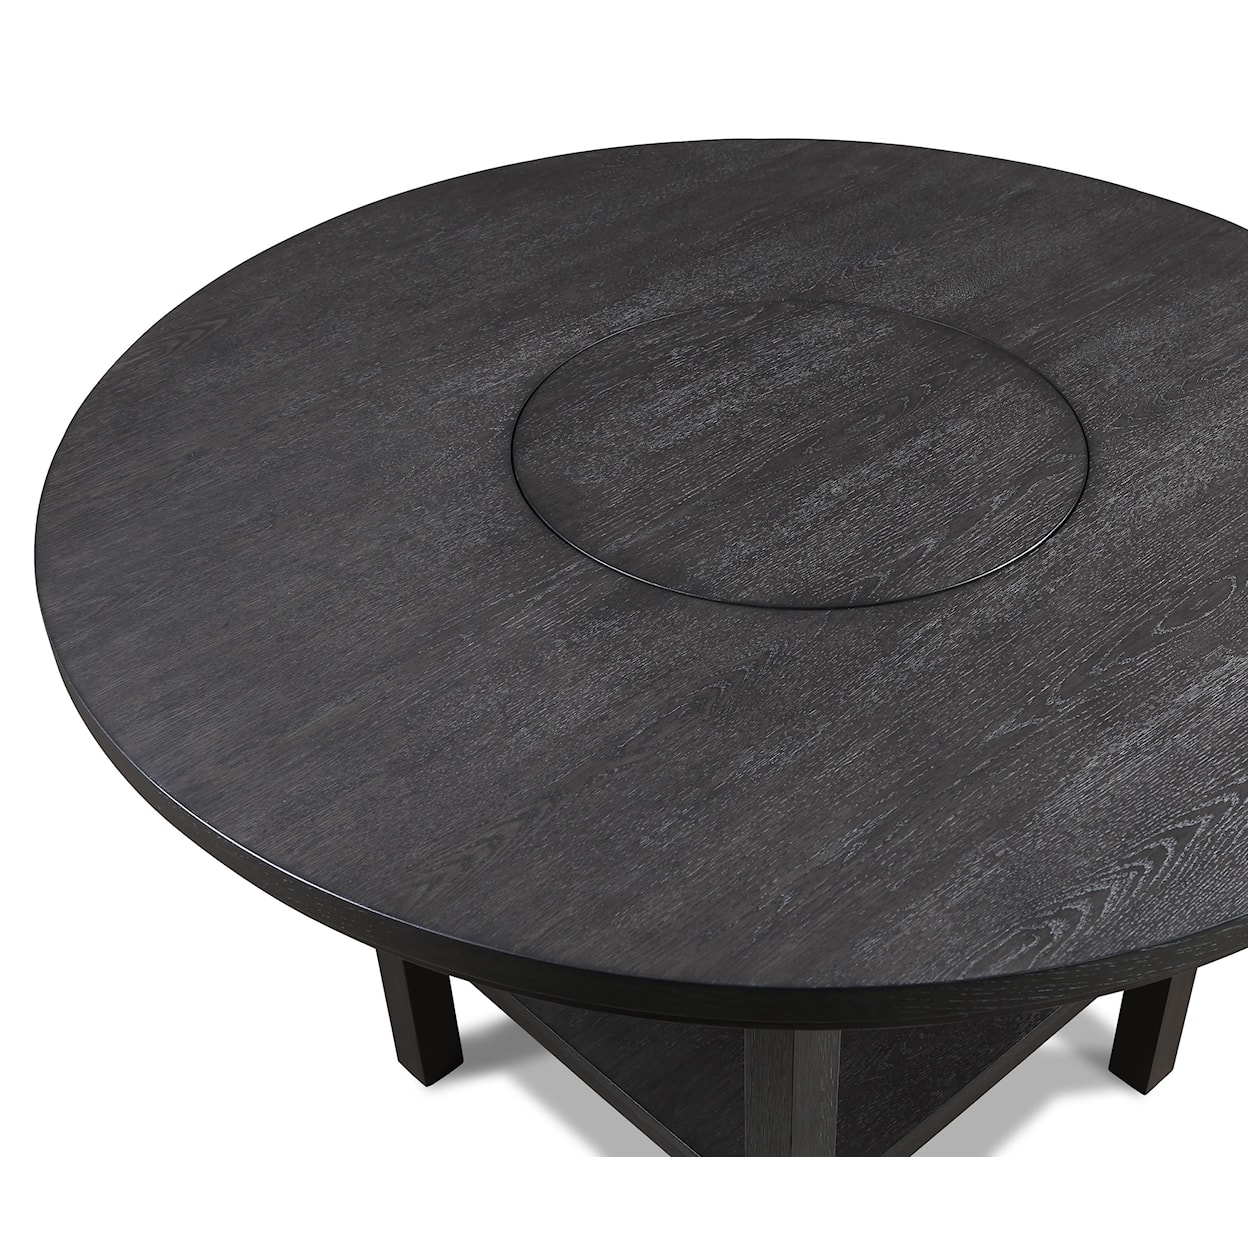 Crown Mark GUTHRIE Counter Height Round Table